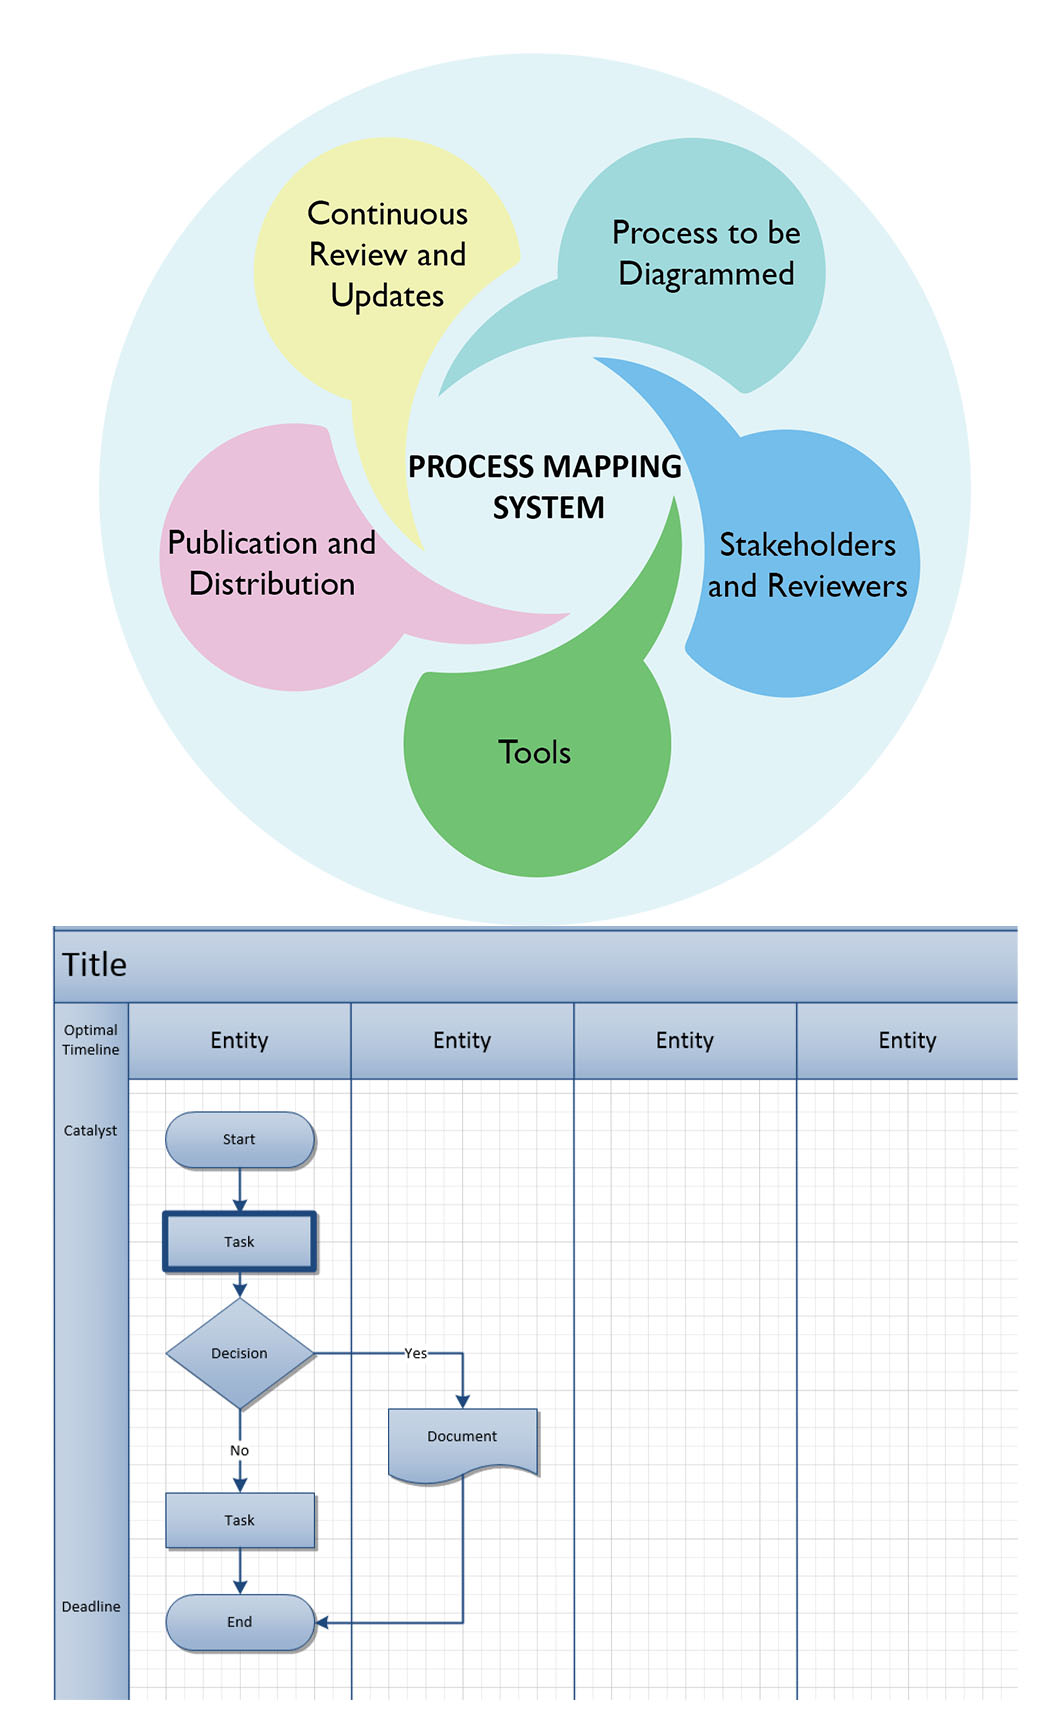 Process Mapping System.